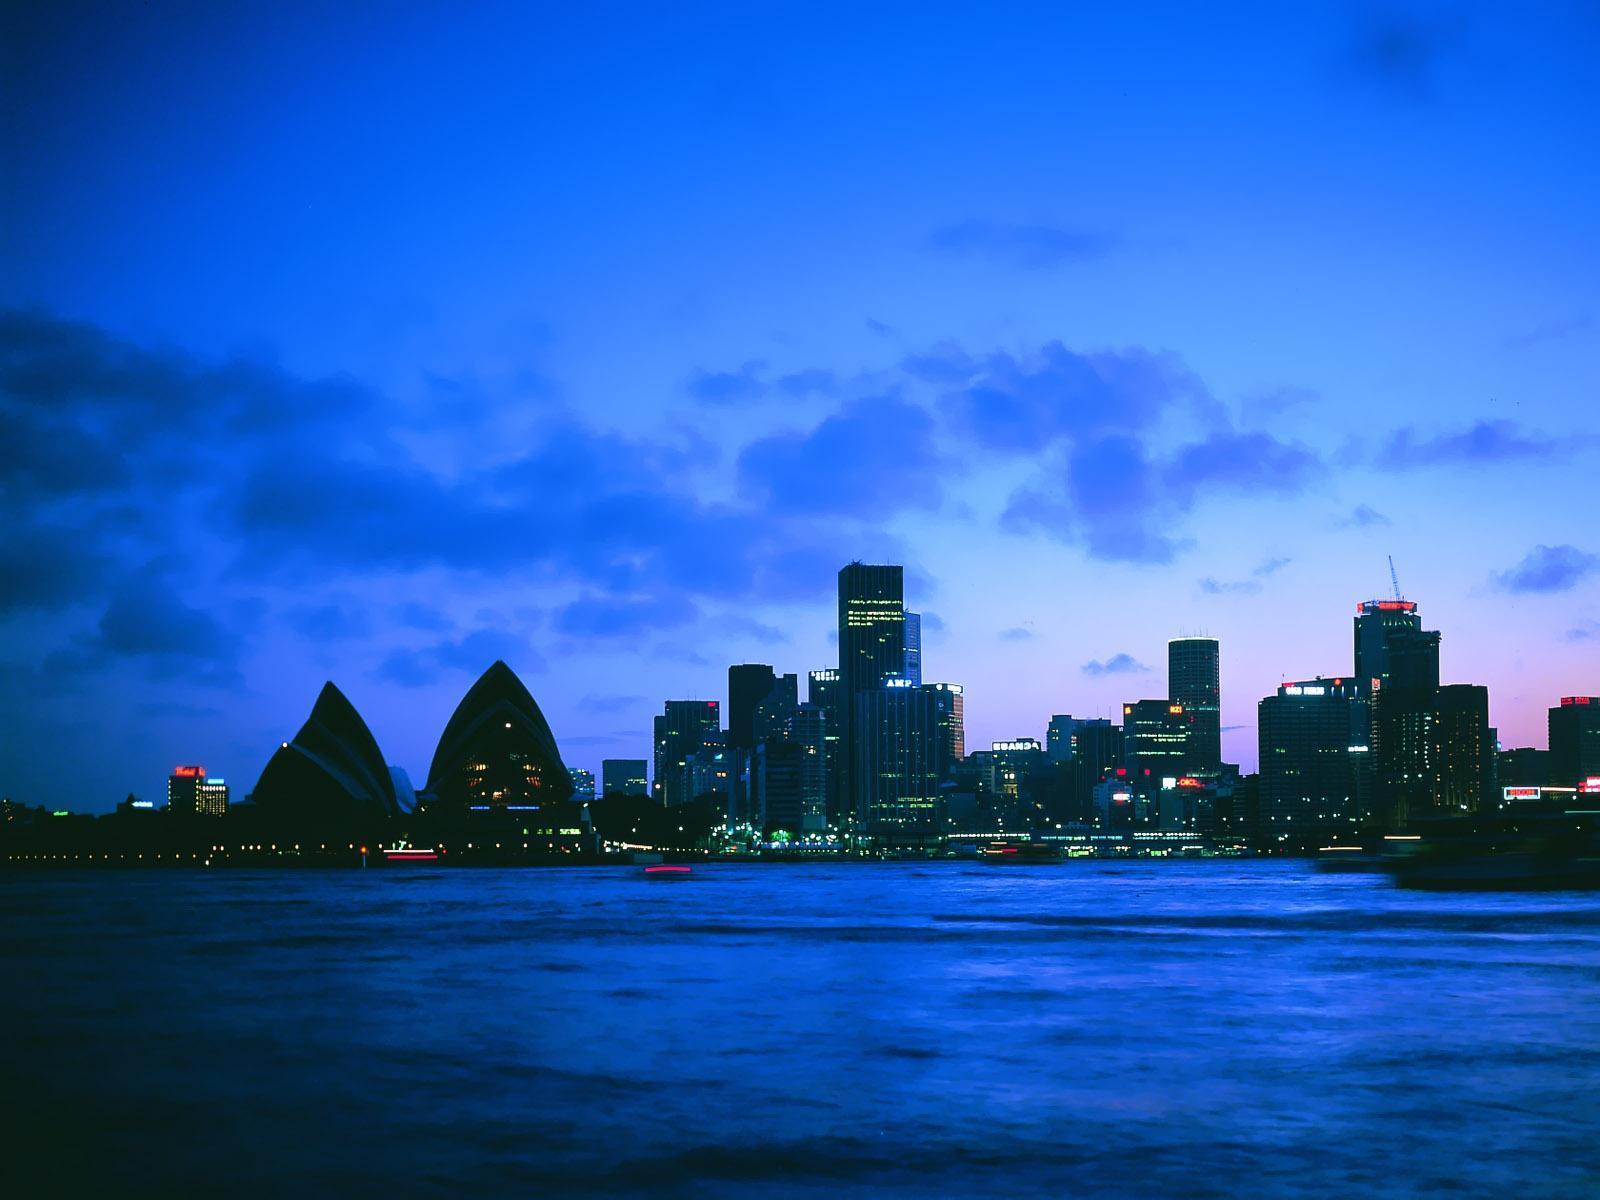 Sidney by night wallpaper and image, picture, photo